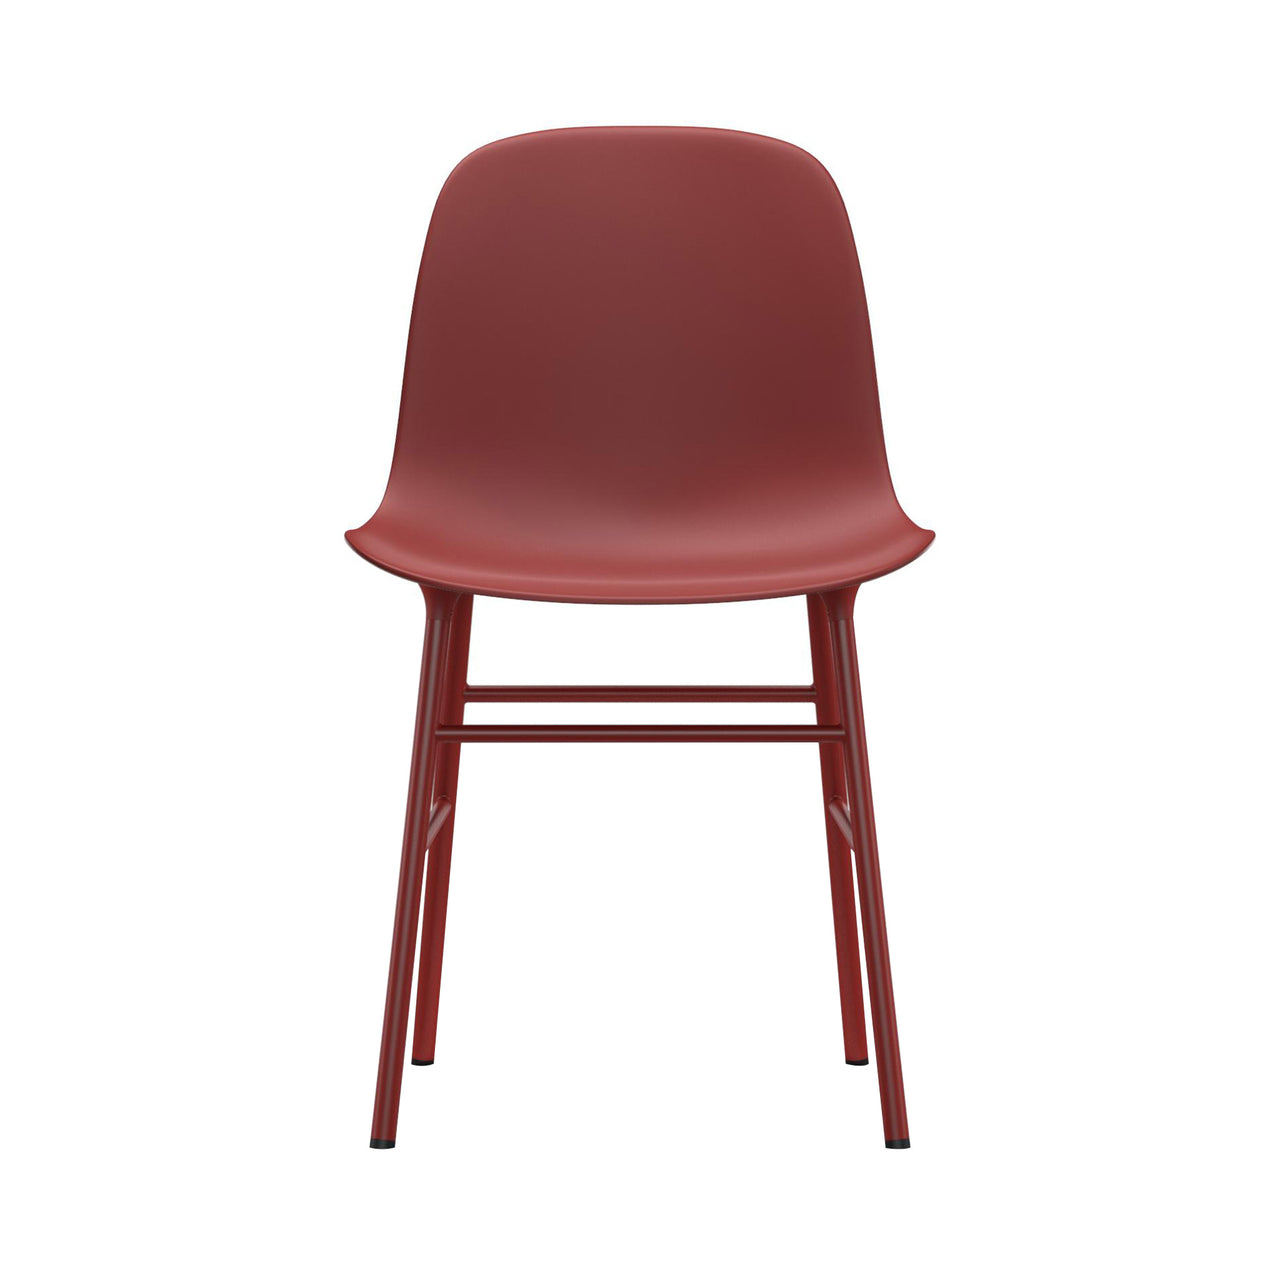 Form Chair: Steel + Red